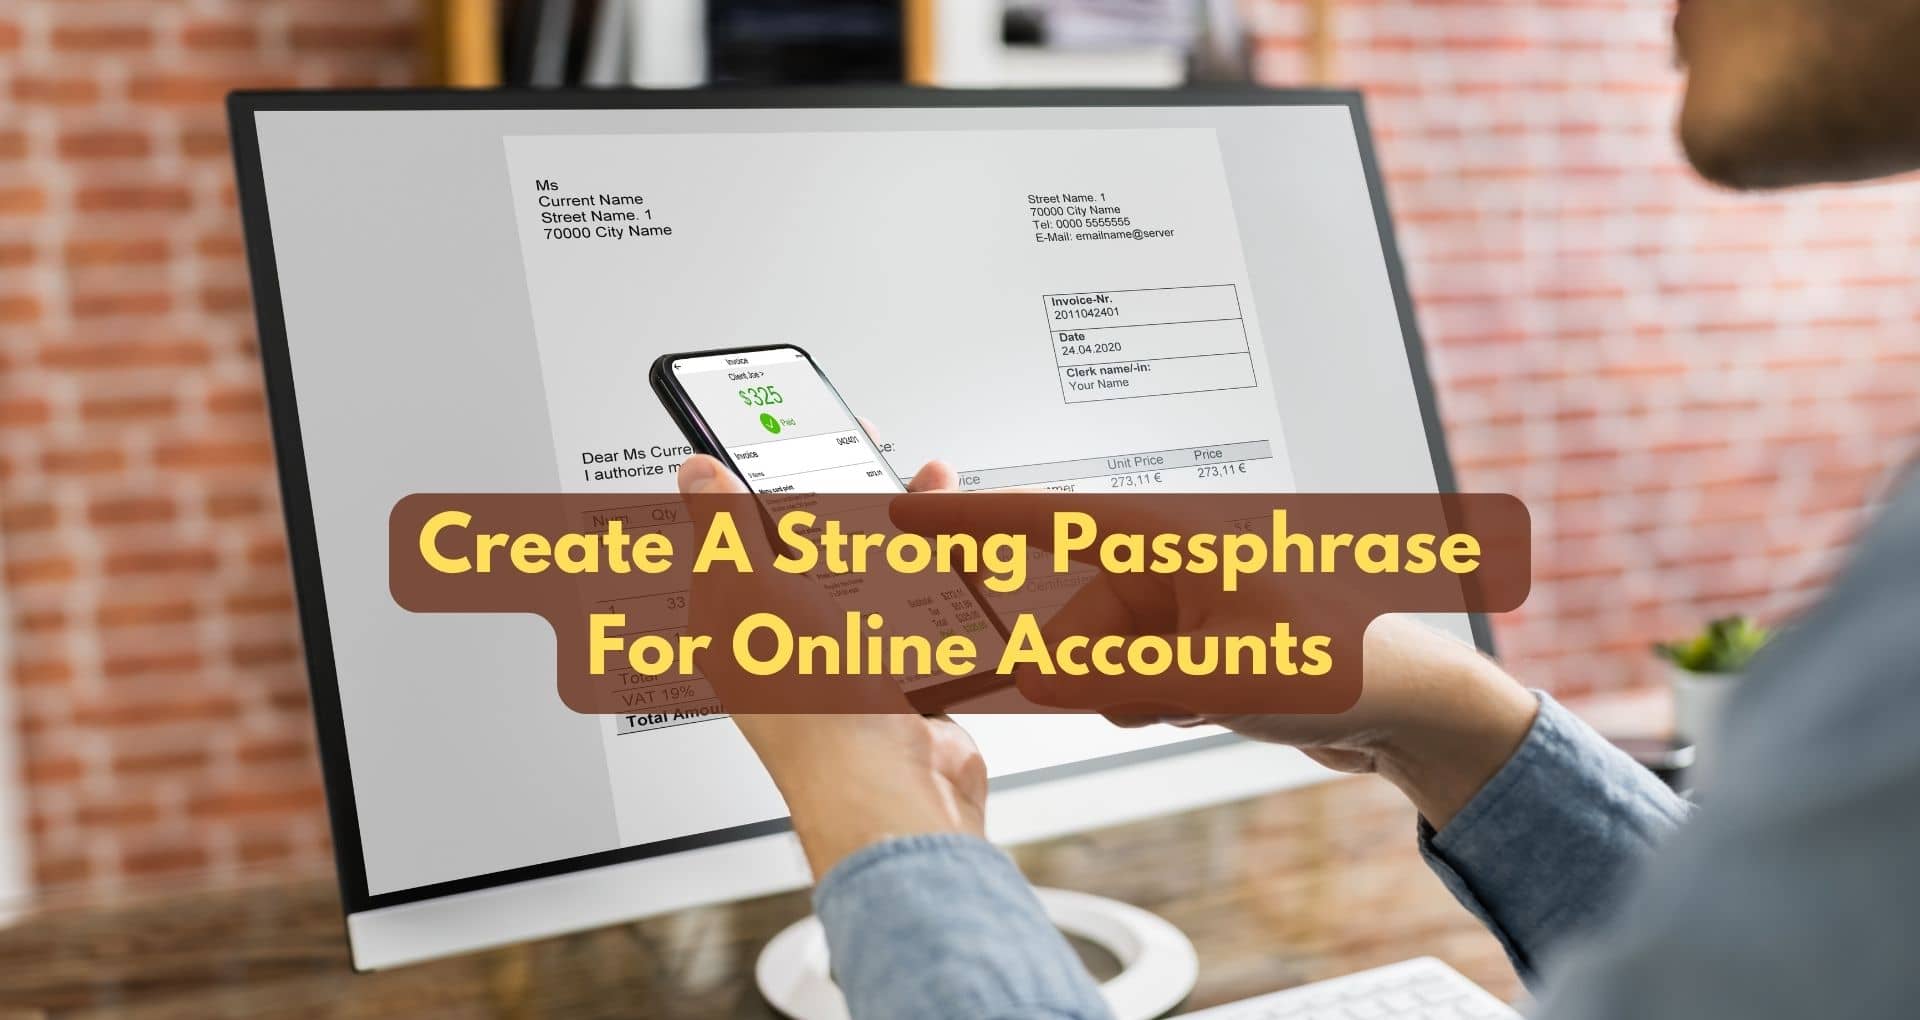 How To Create A Strong Passphrase For Online Accounts?